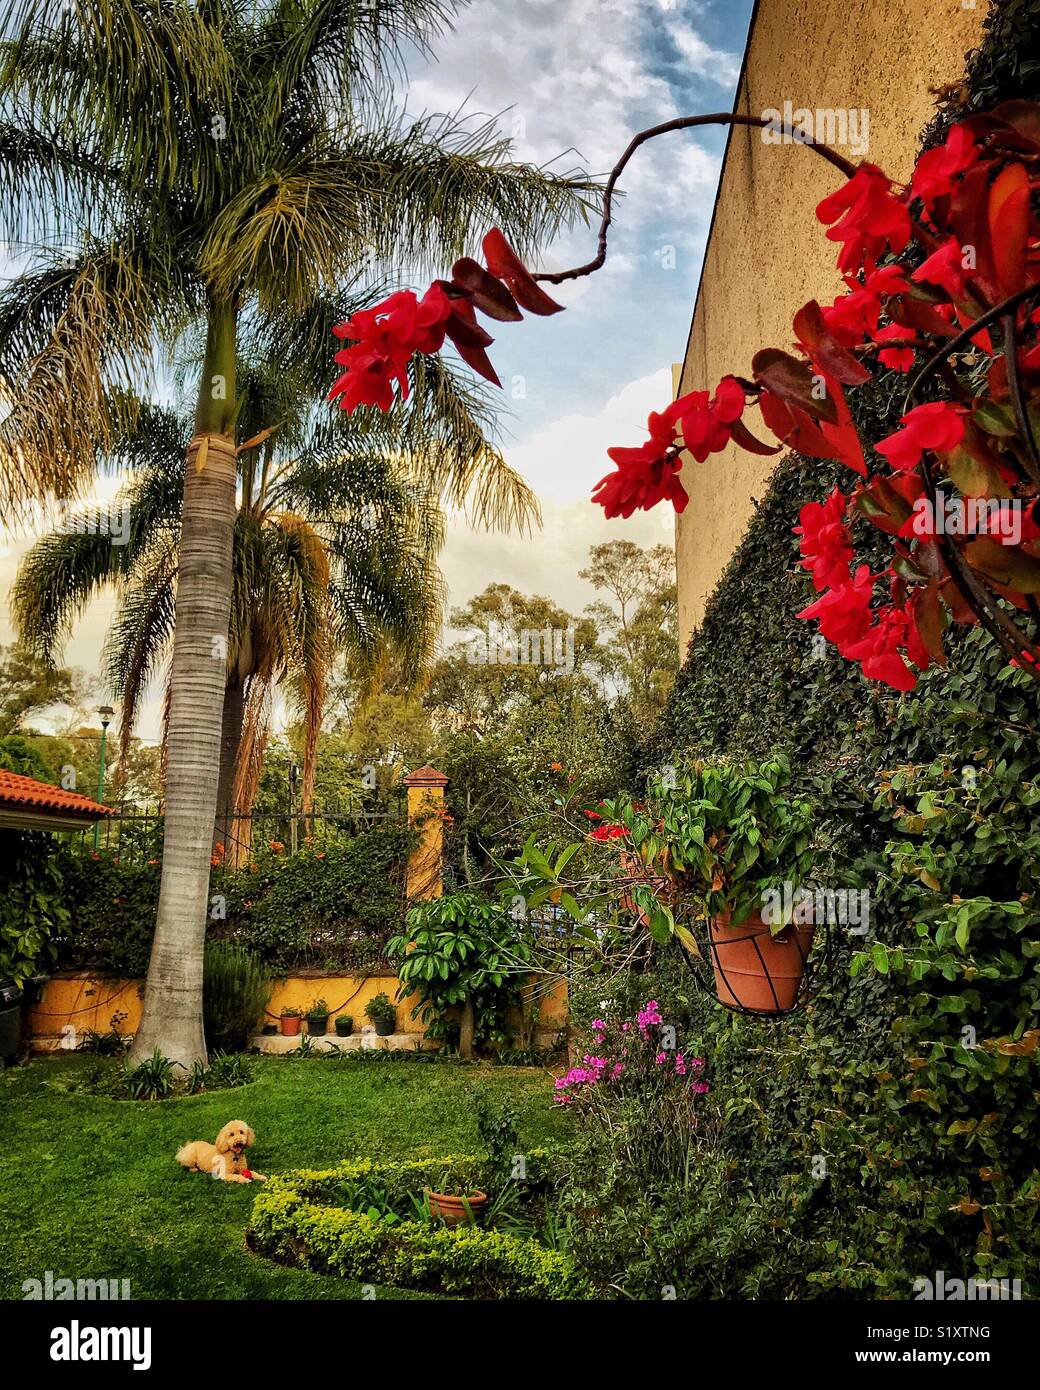 Flowers bloom and a dog relaxes in the evening light in a beautifully landscaped backyard in Ajijic, Mexico. Stock Photo